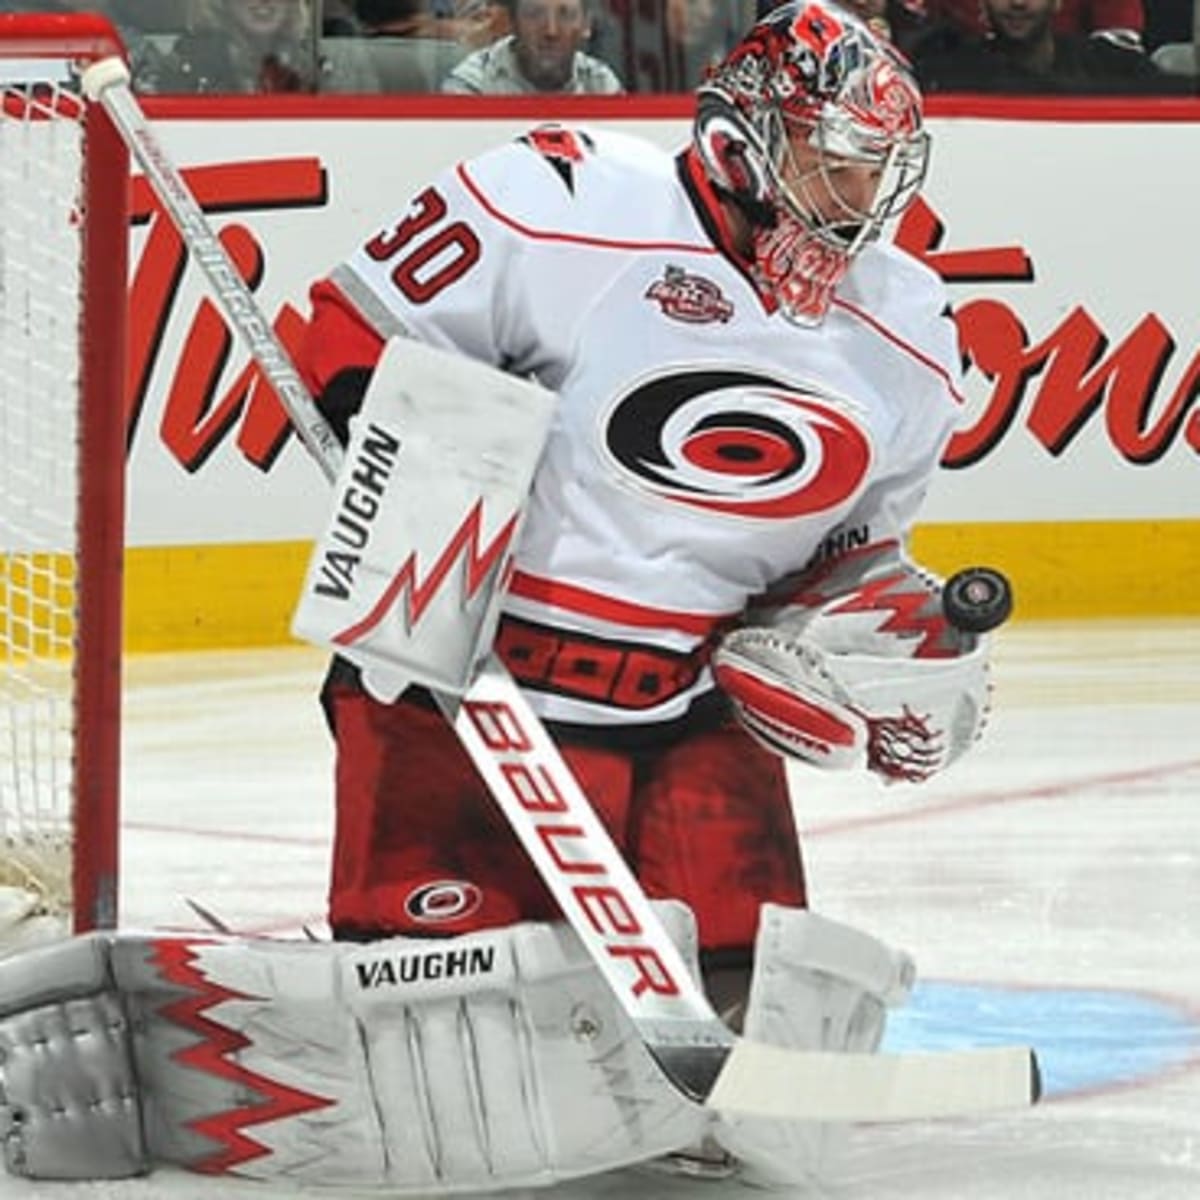 Carolina Hurricanes: Is Cam Ward the best goalie in franchise history?